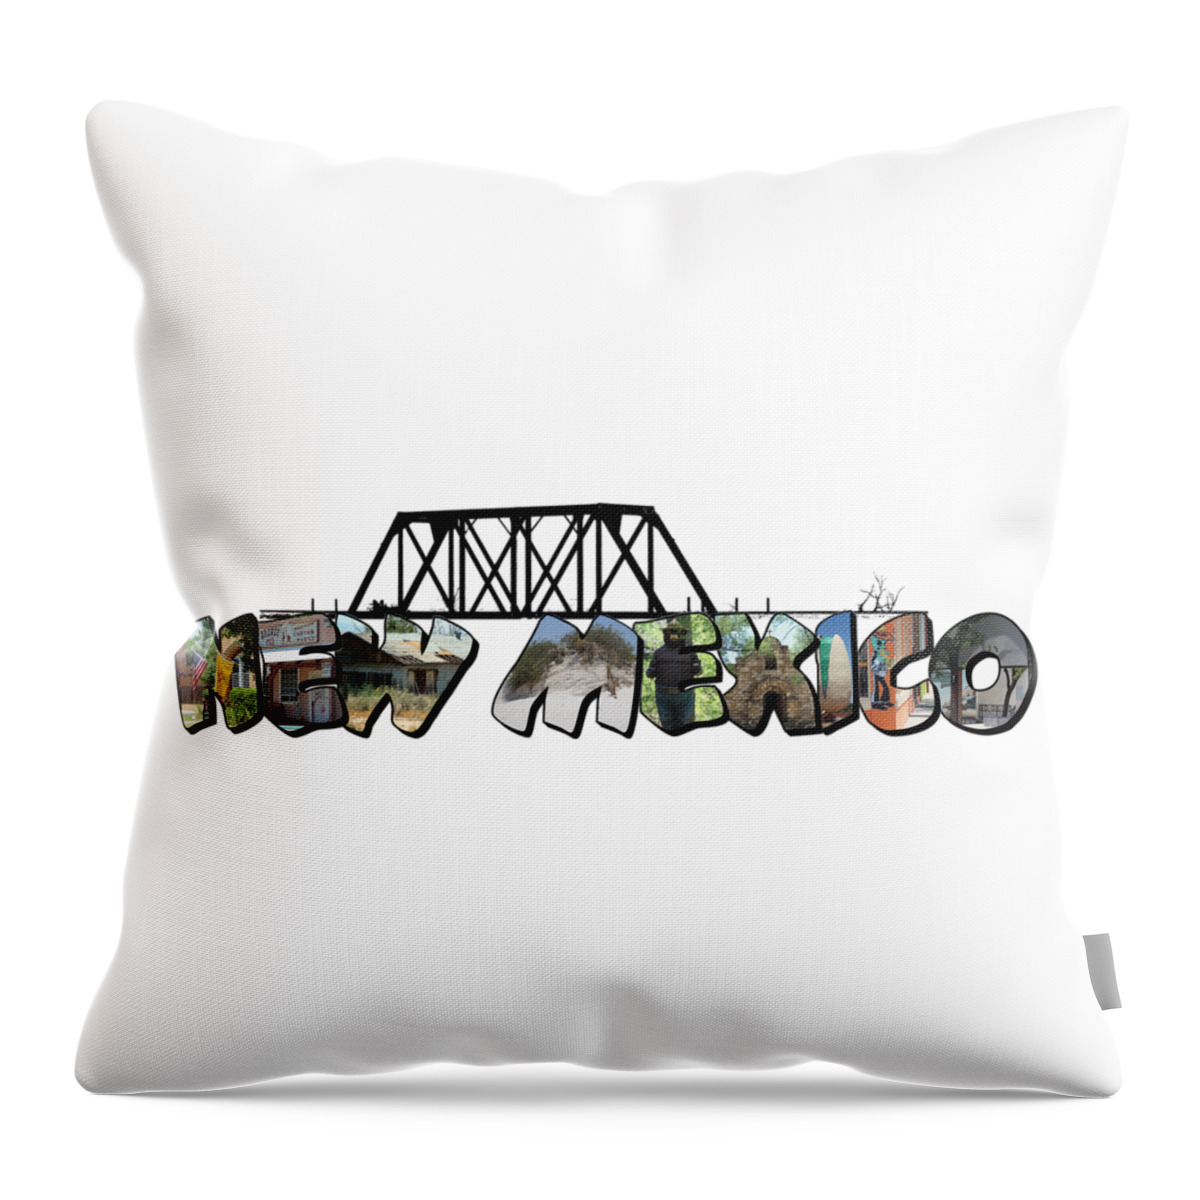 New Mexico Throw Pillow featuring the photograph New Mexico Big Letter by Colleen Cornelius